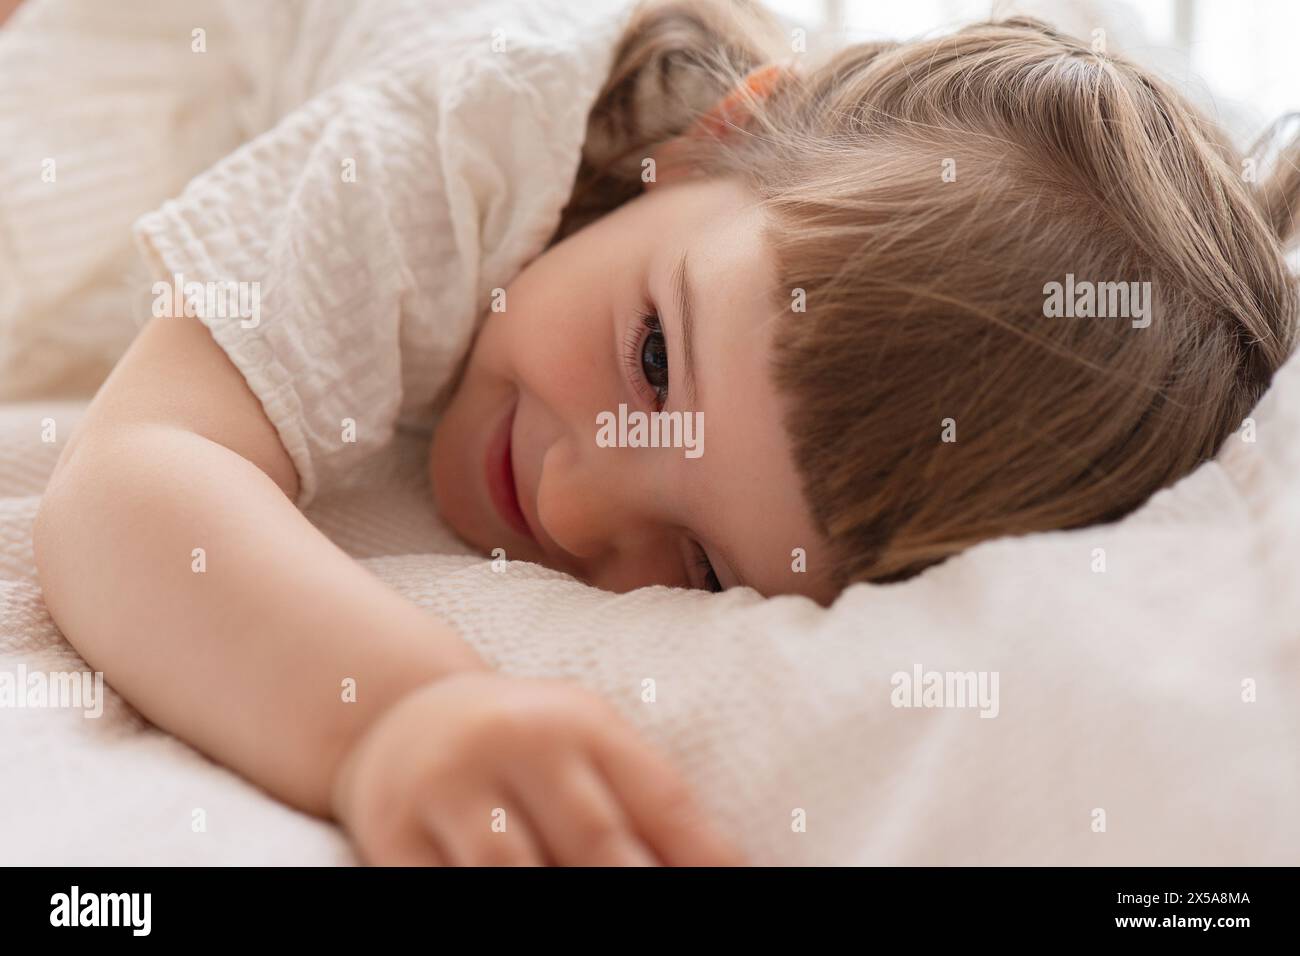 A young child with bright eyes and a gentle smile lies comfortably on a creamy textured blanket, radiating joy and innocence Stock Photo